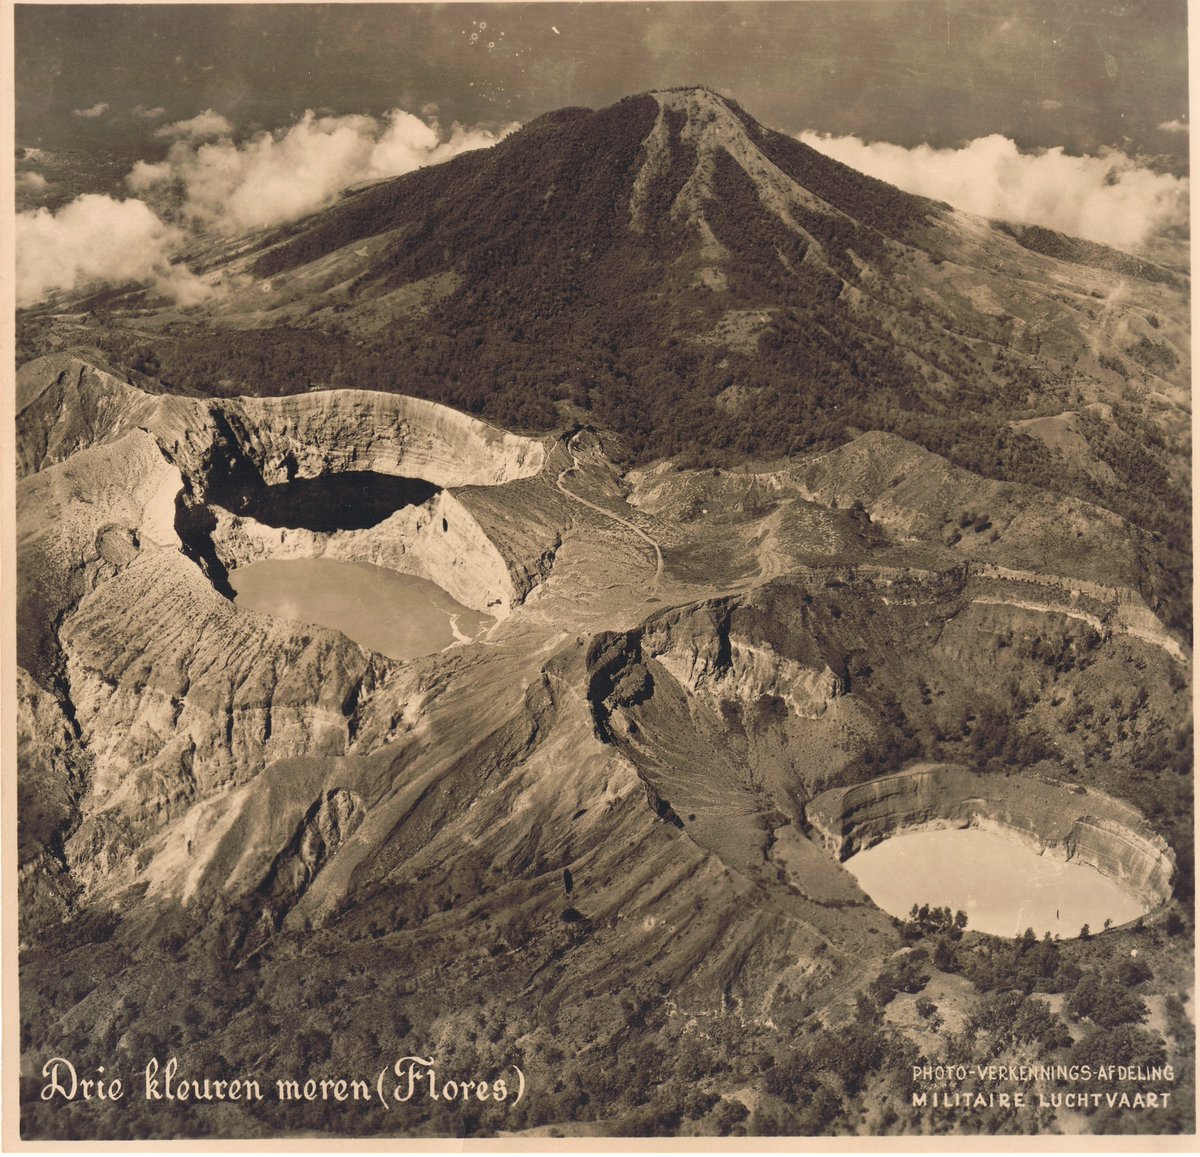 The Anak Krakatau eruption has reminded me of some old photos my dad took back in the early 1940's while stationed in (what was then) the Dutch East Indies, including one of the aforementioned volcano.